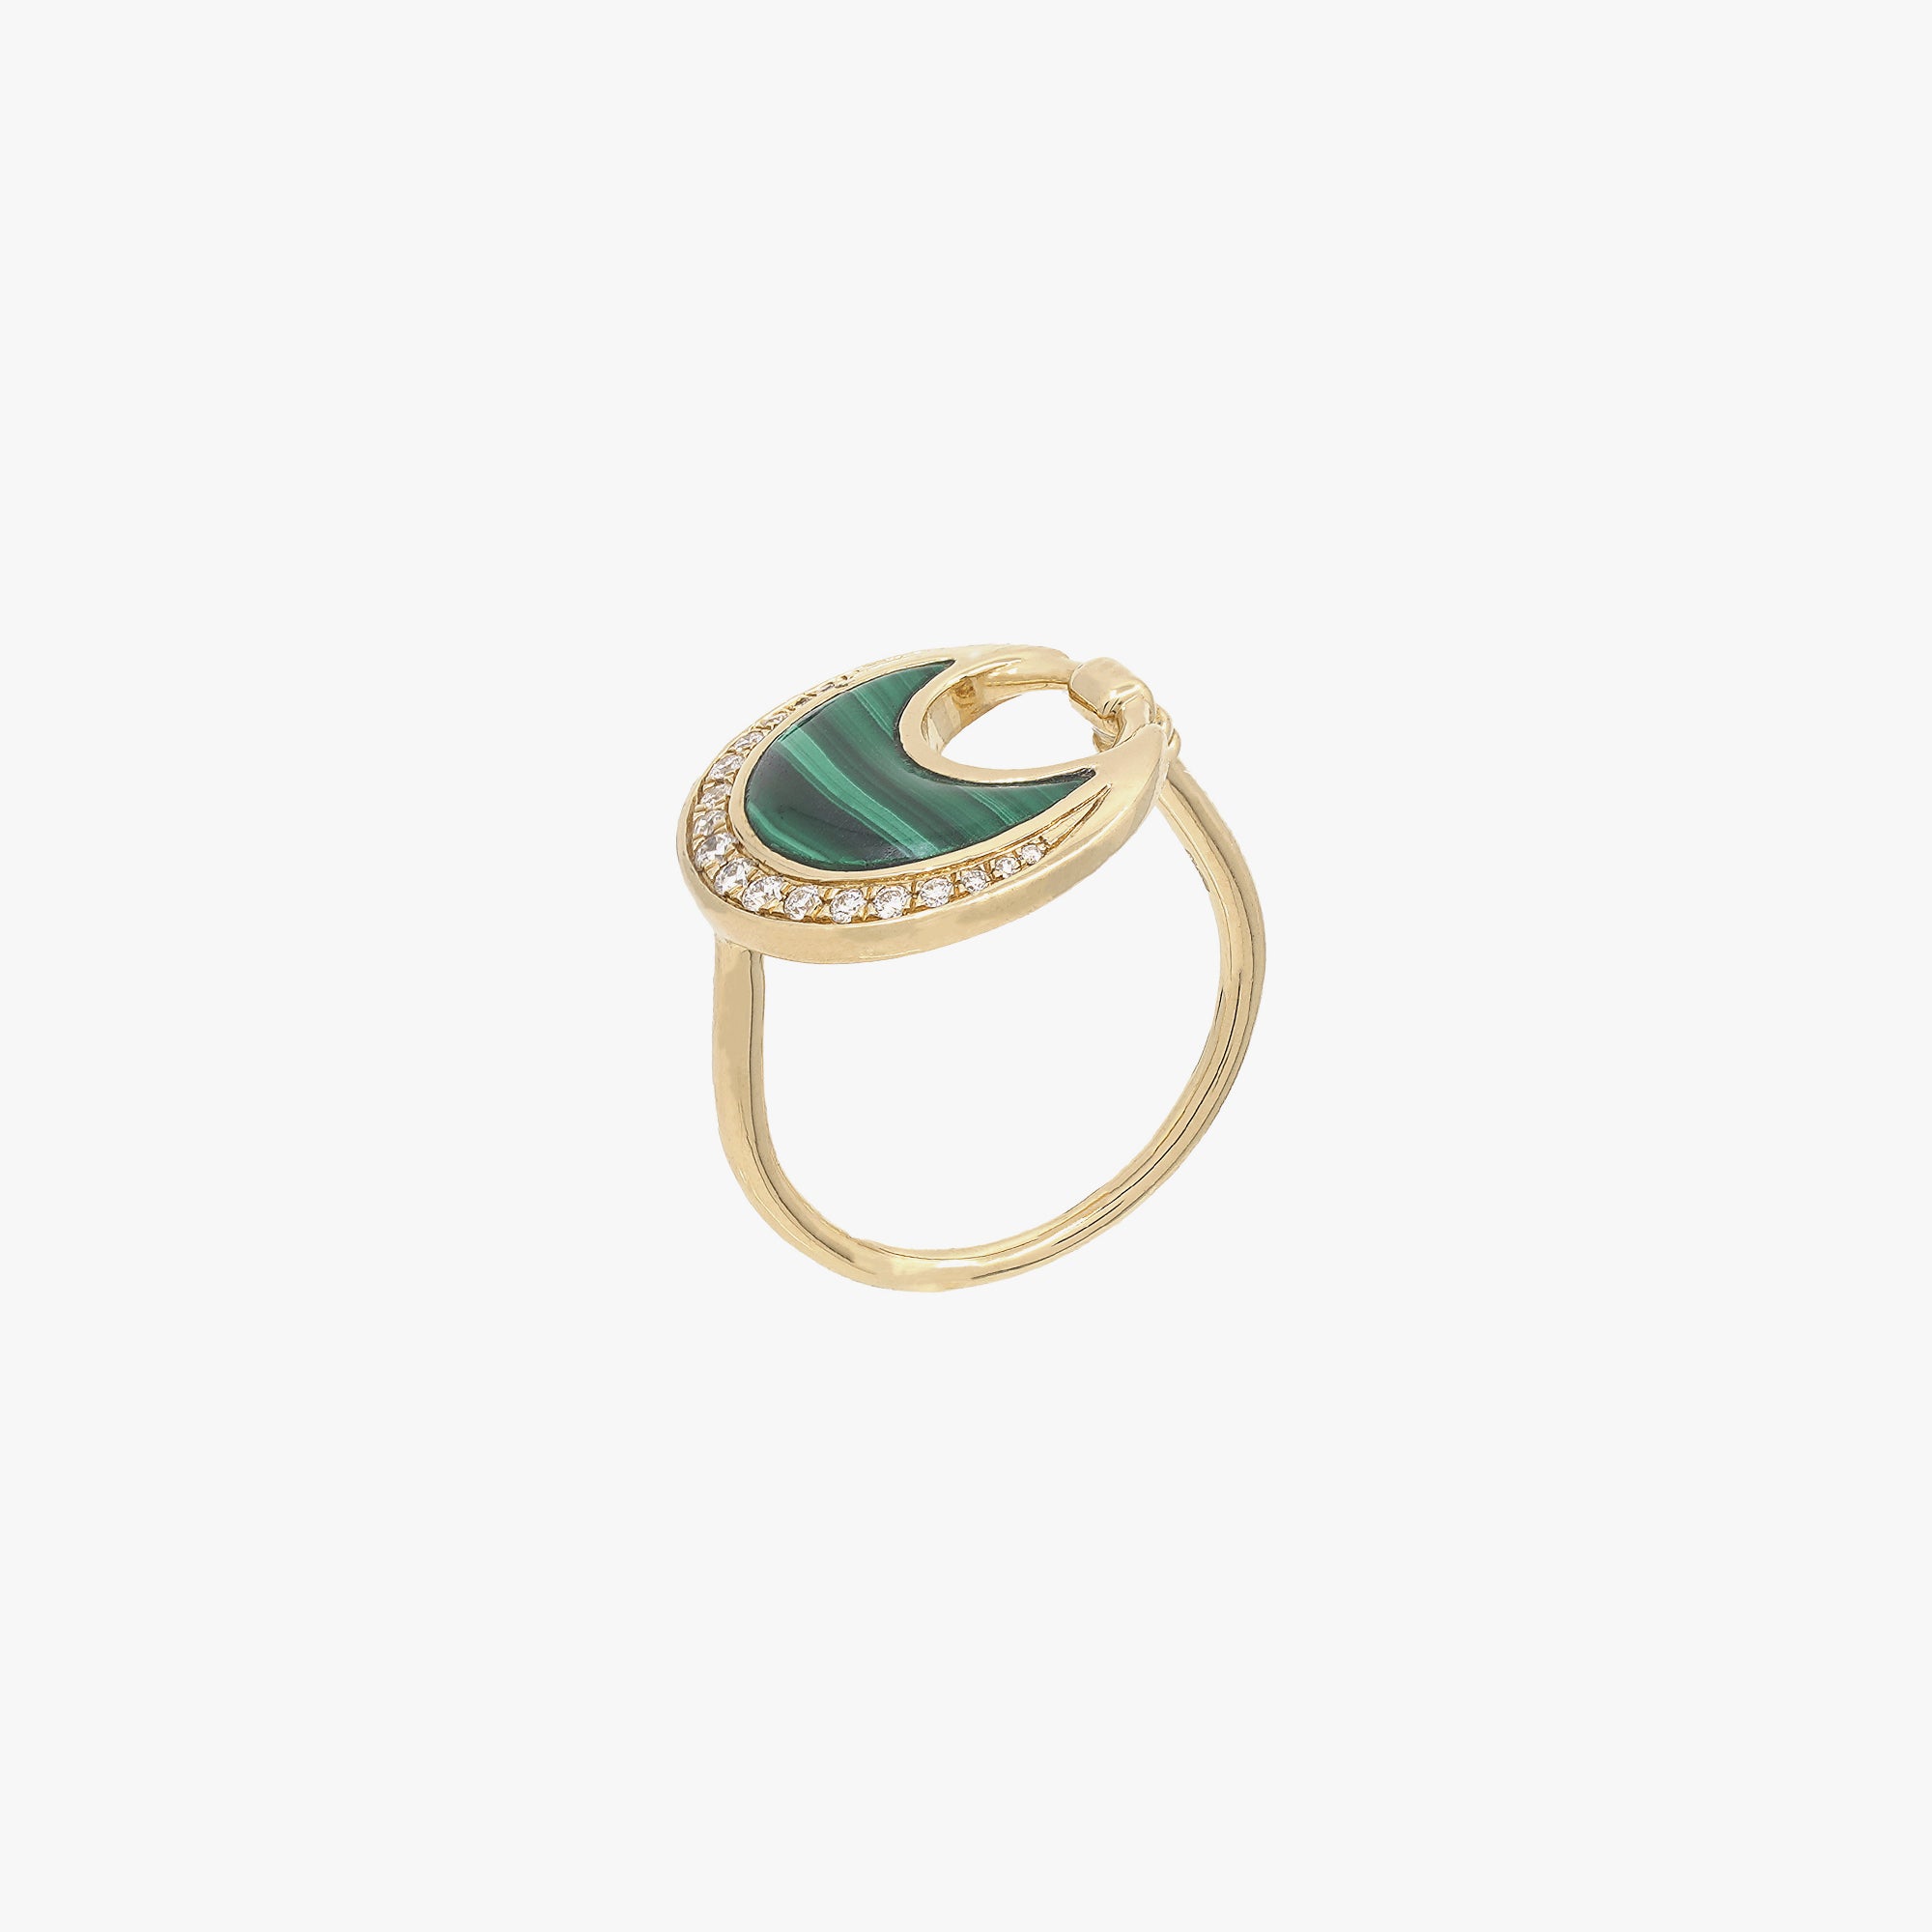 Al Hilal ring in yellow gold with malachite stone and diamonds